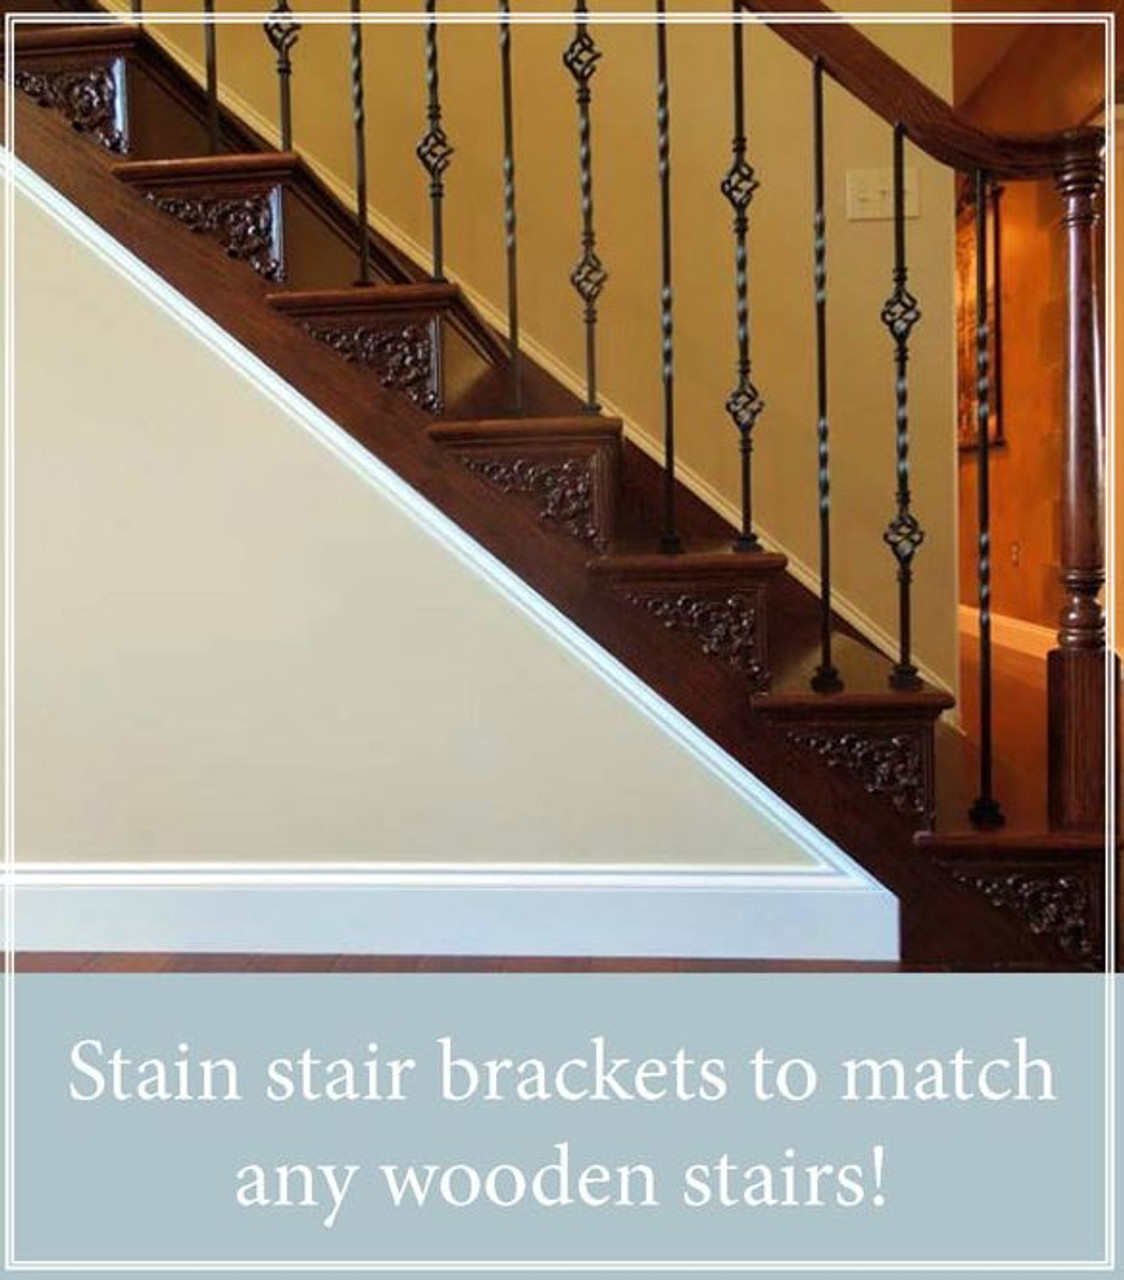 Stain stair brackets to match any wood stairs